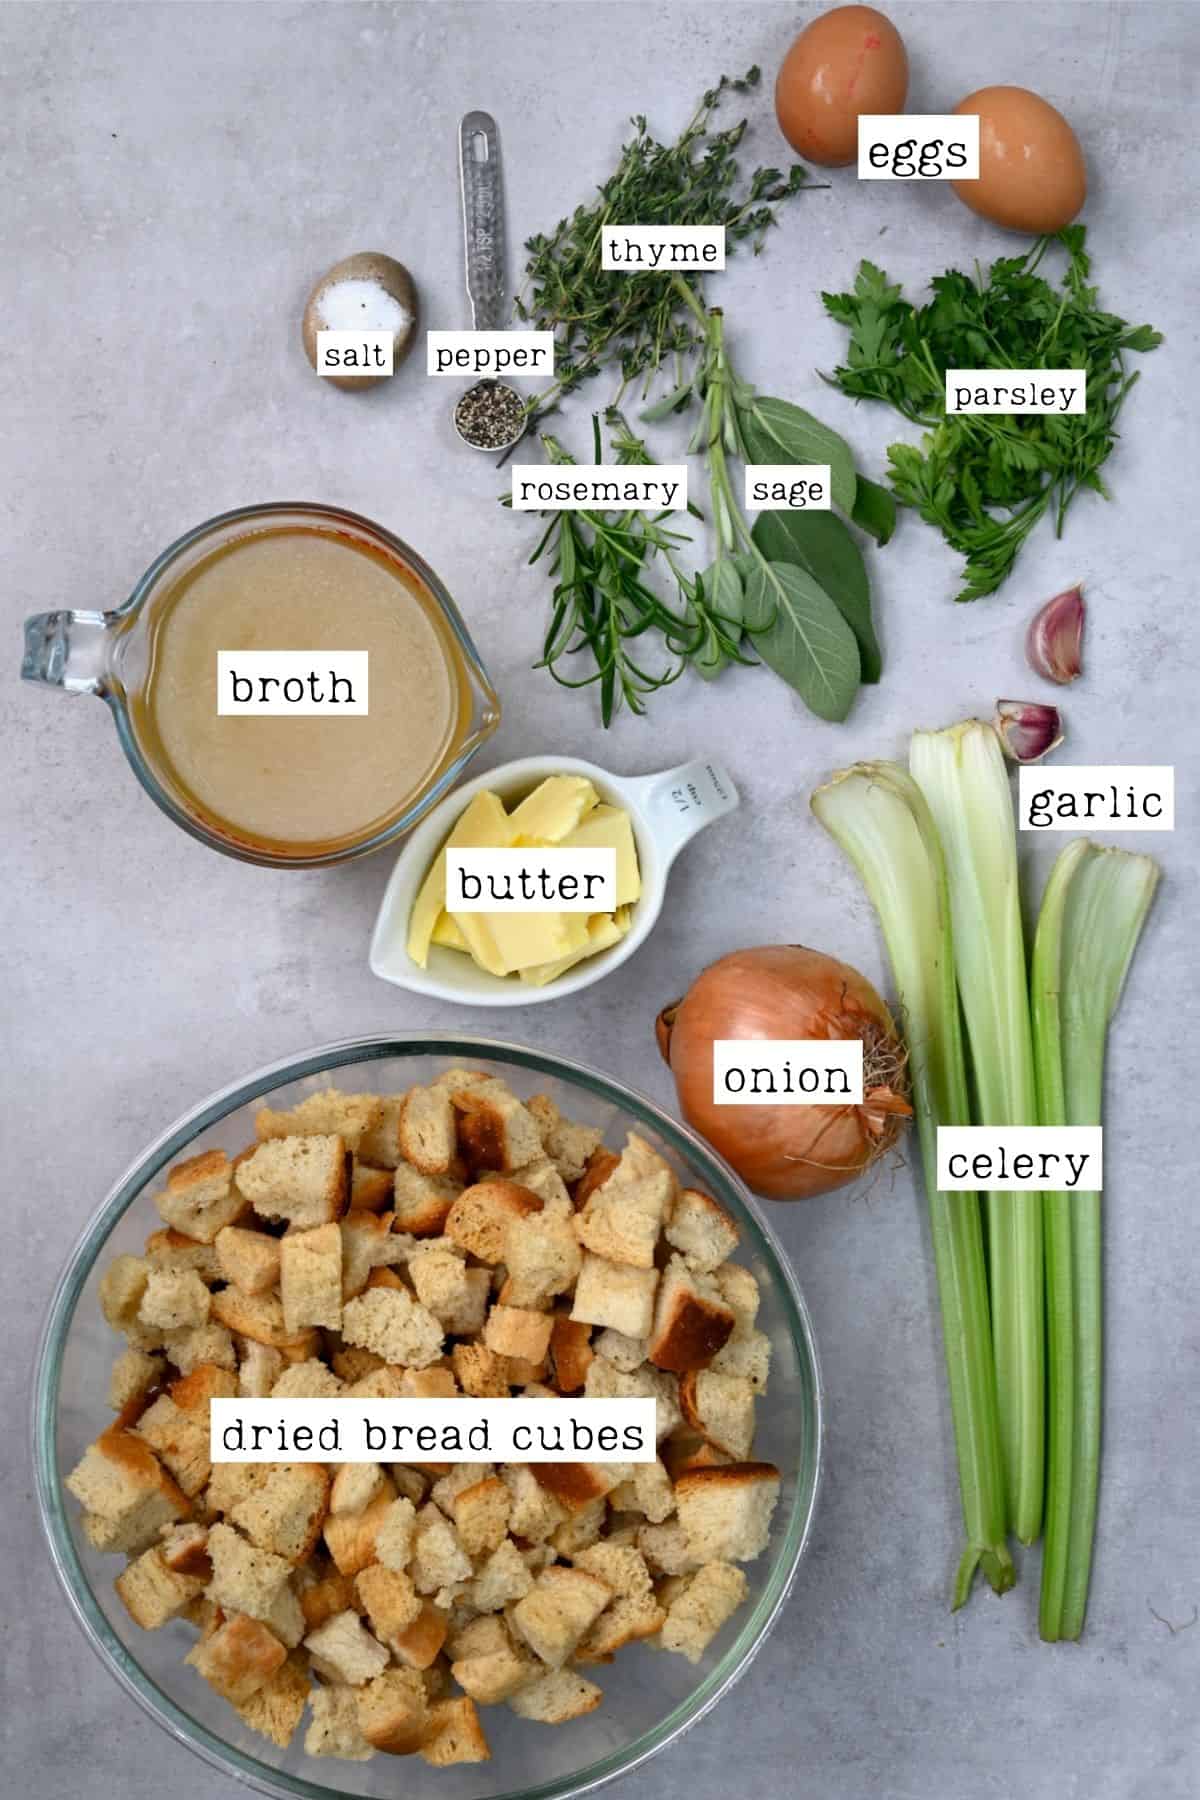 Ingredients for homemade stuffing